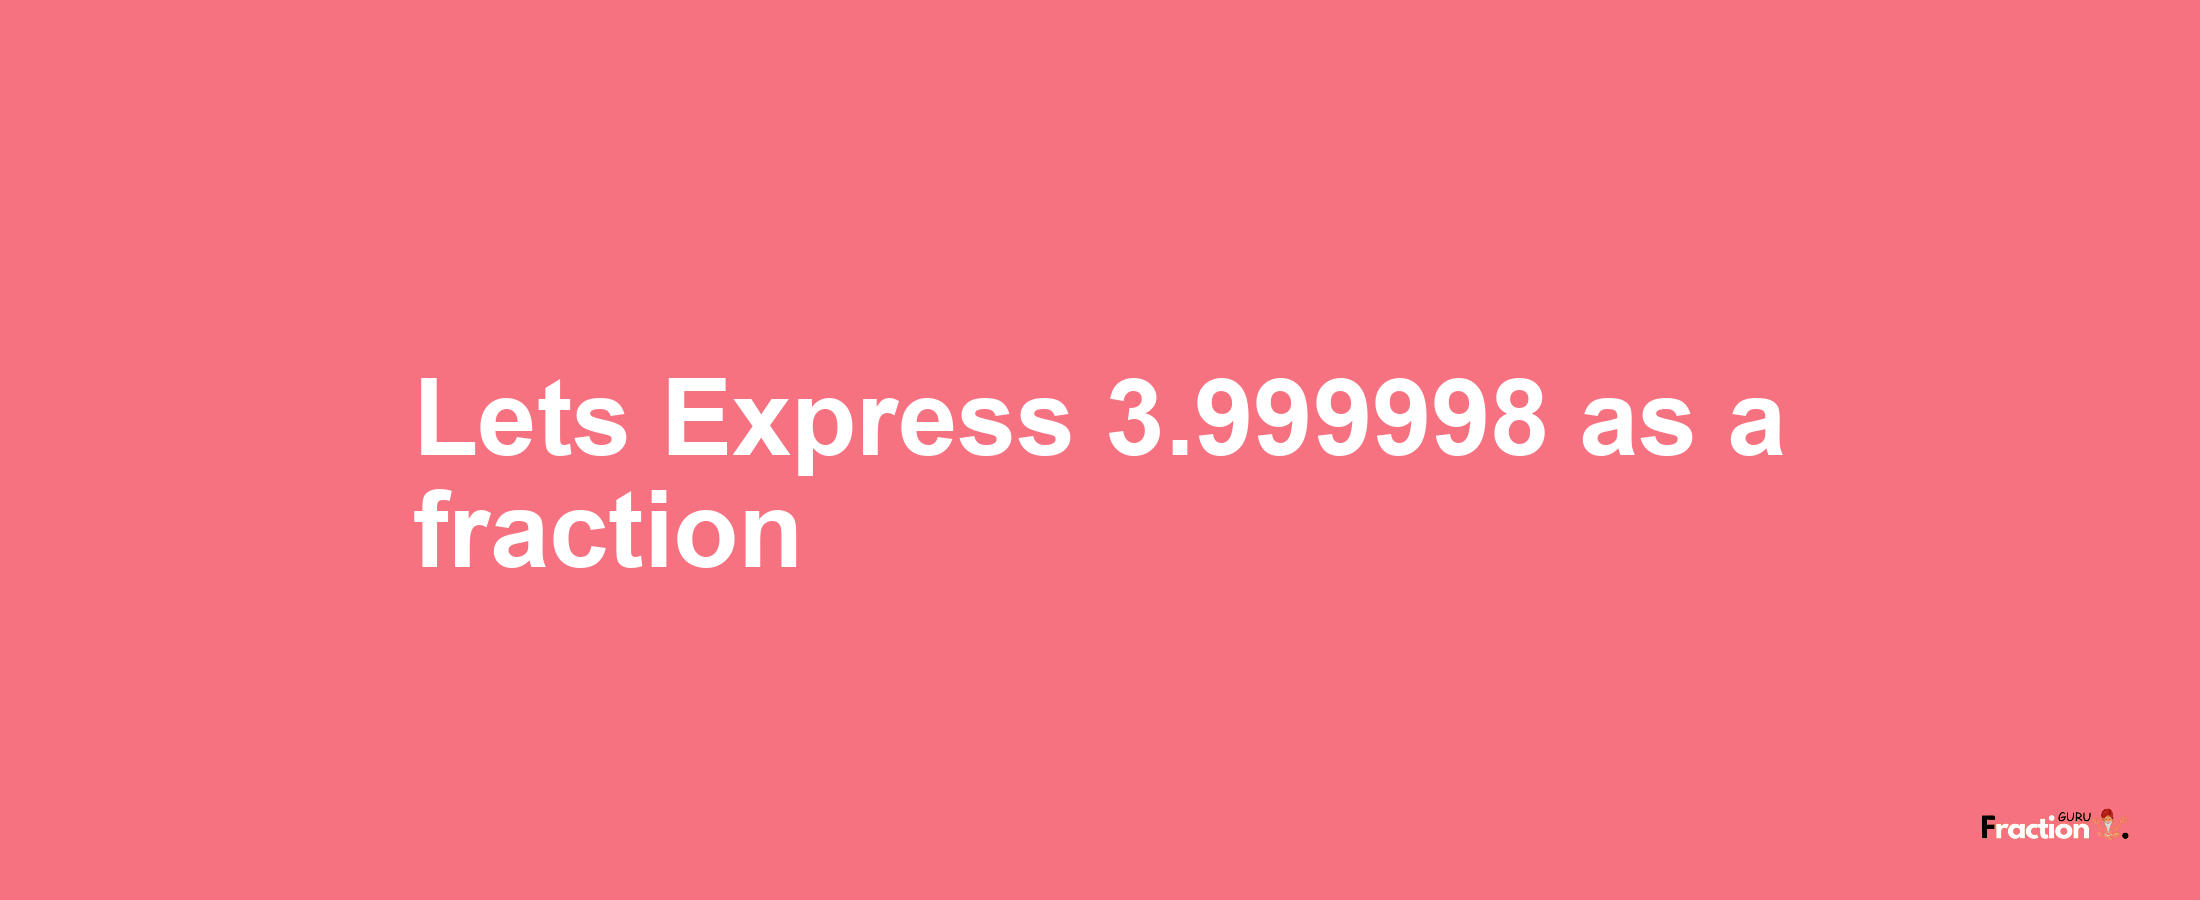 Lets Express 3.999998 as afraction